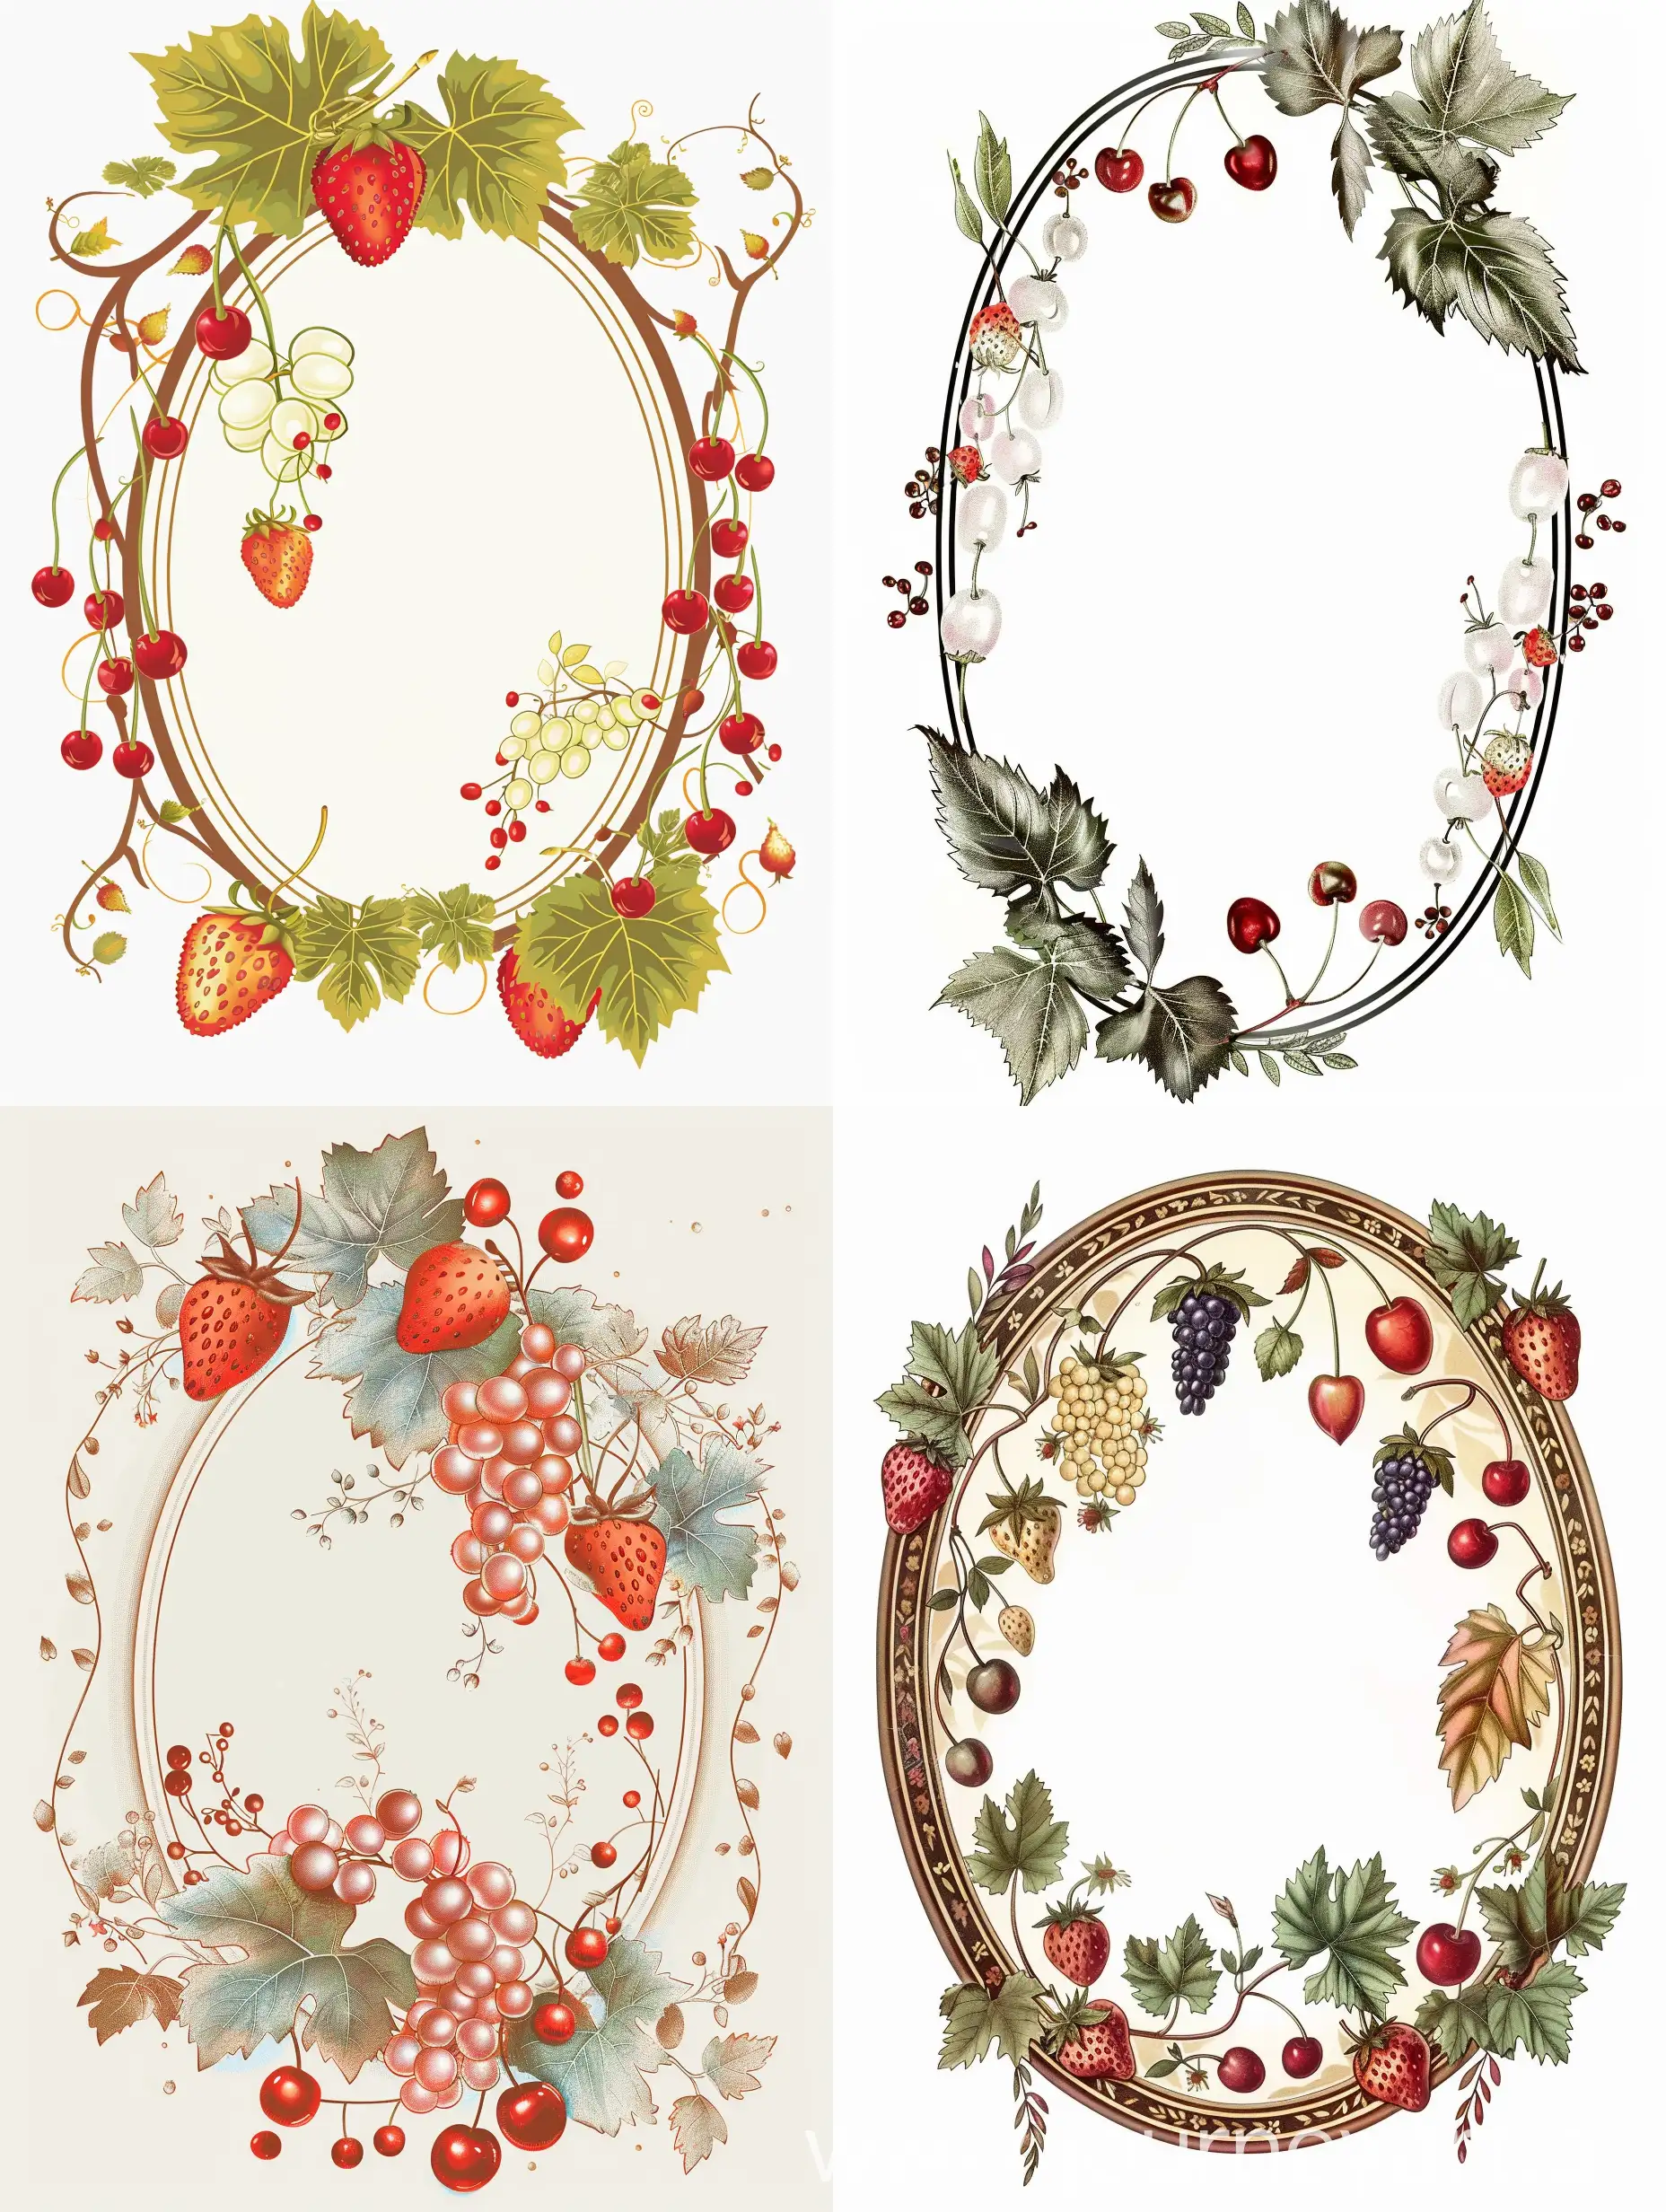 Vintage-Victorian-Oval-Ornament-with-Grape-Leaves-and-Berries-on-White-Background